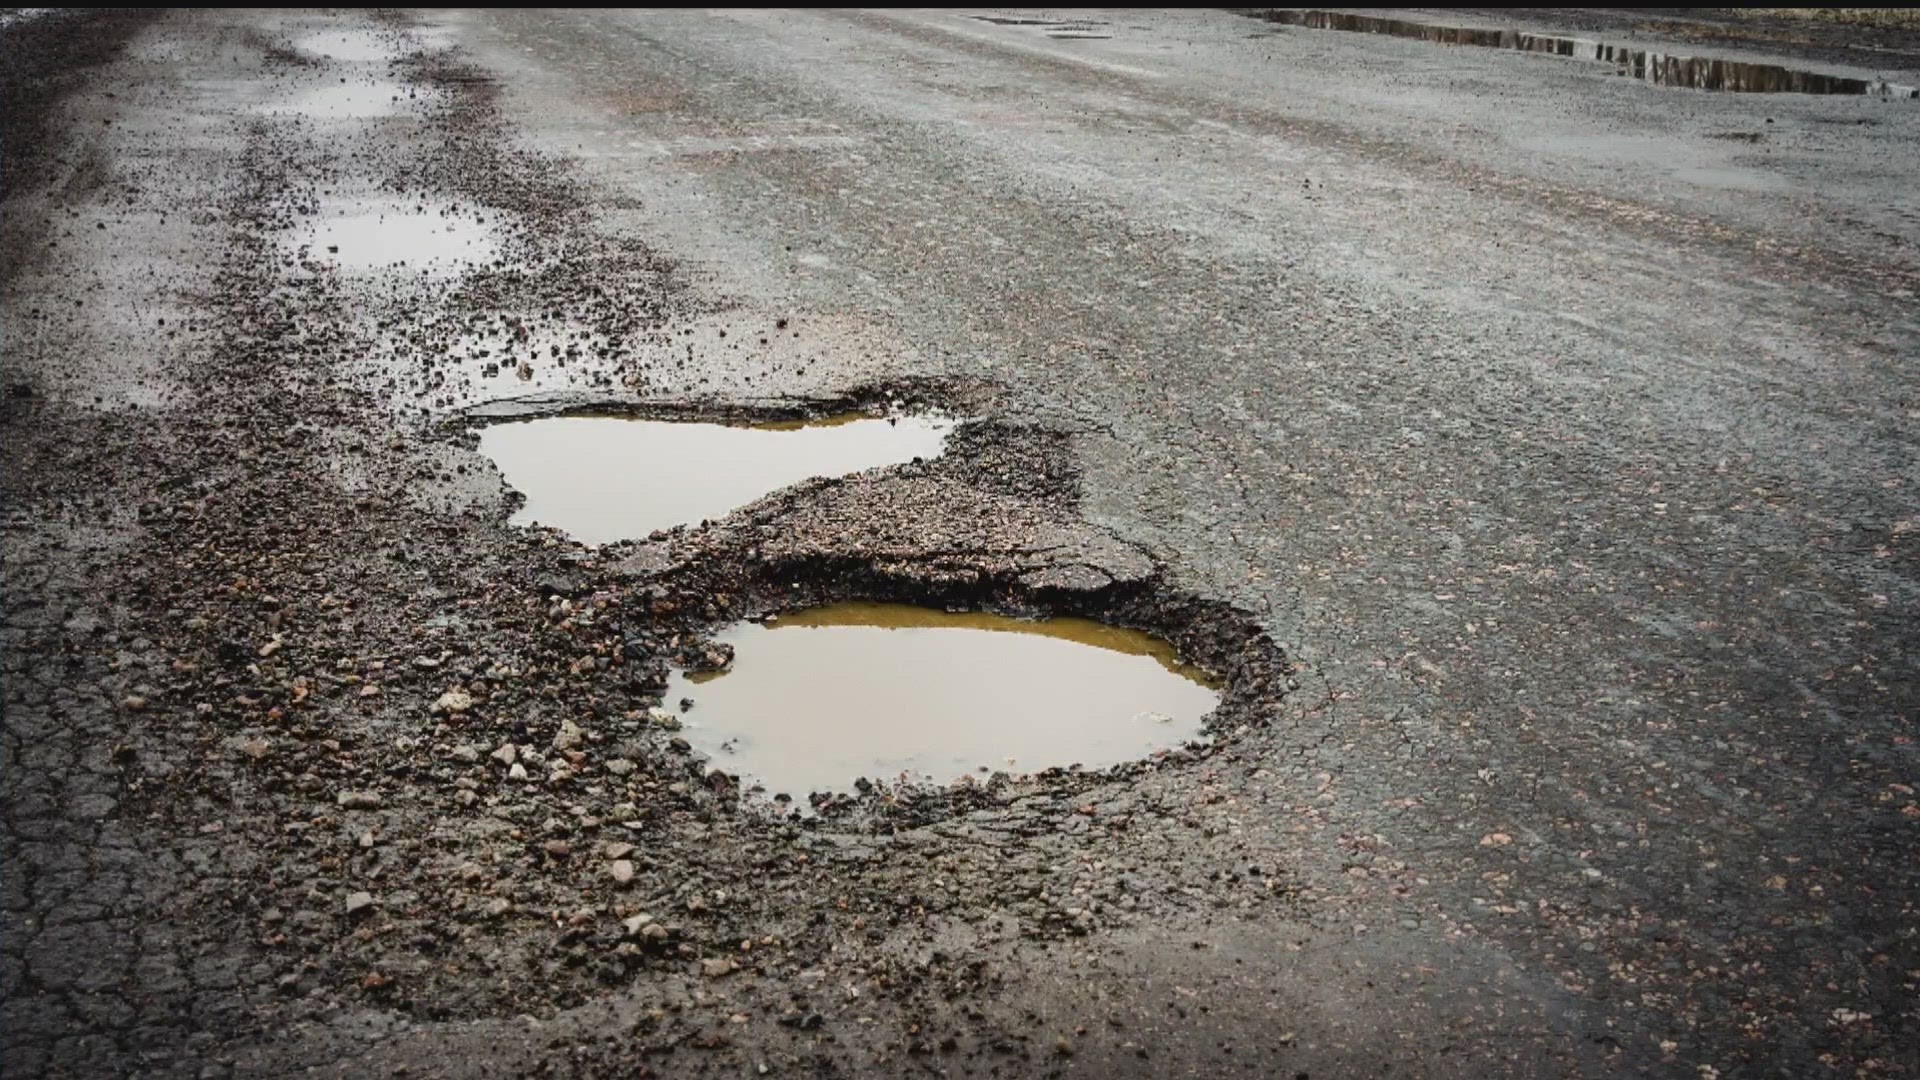 While this year will go down as one of the snowiest winters, it might also go down as one of the worst pothole seasons in recent memory.